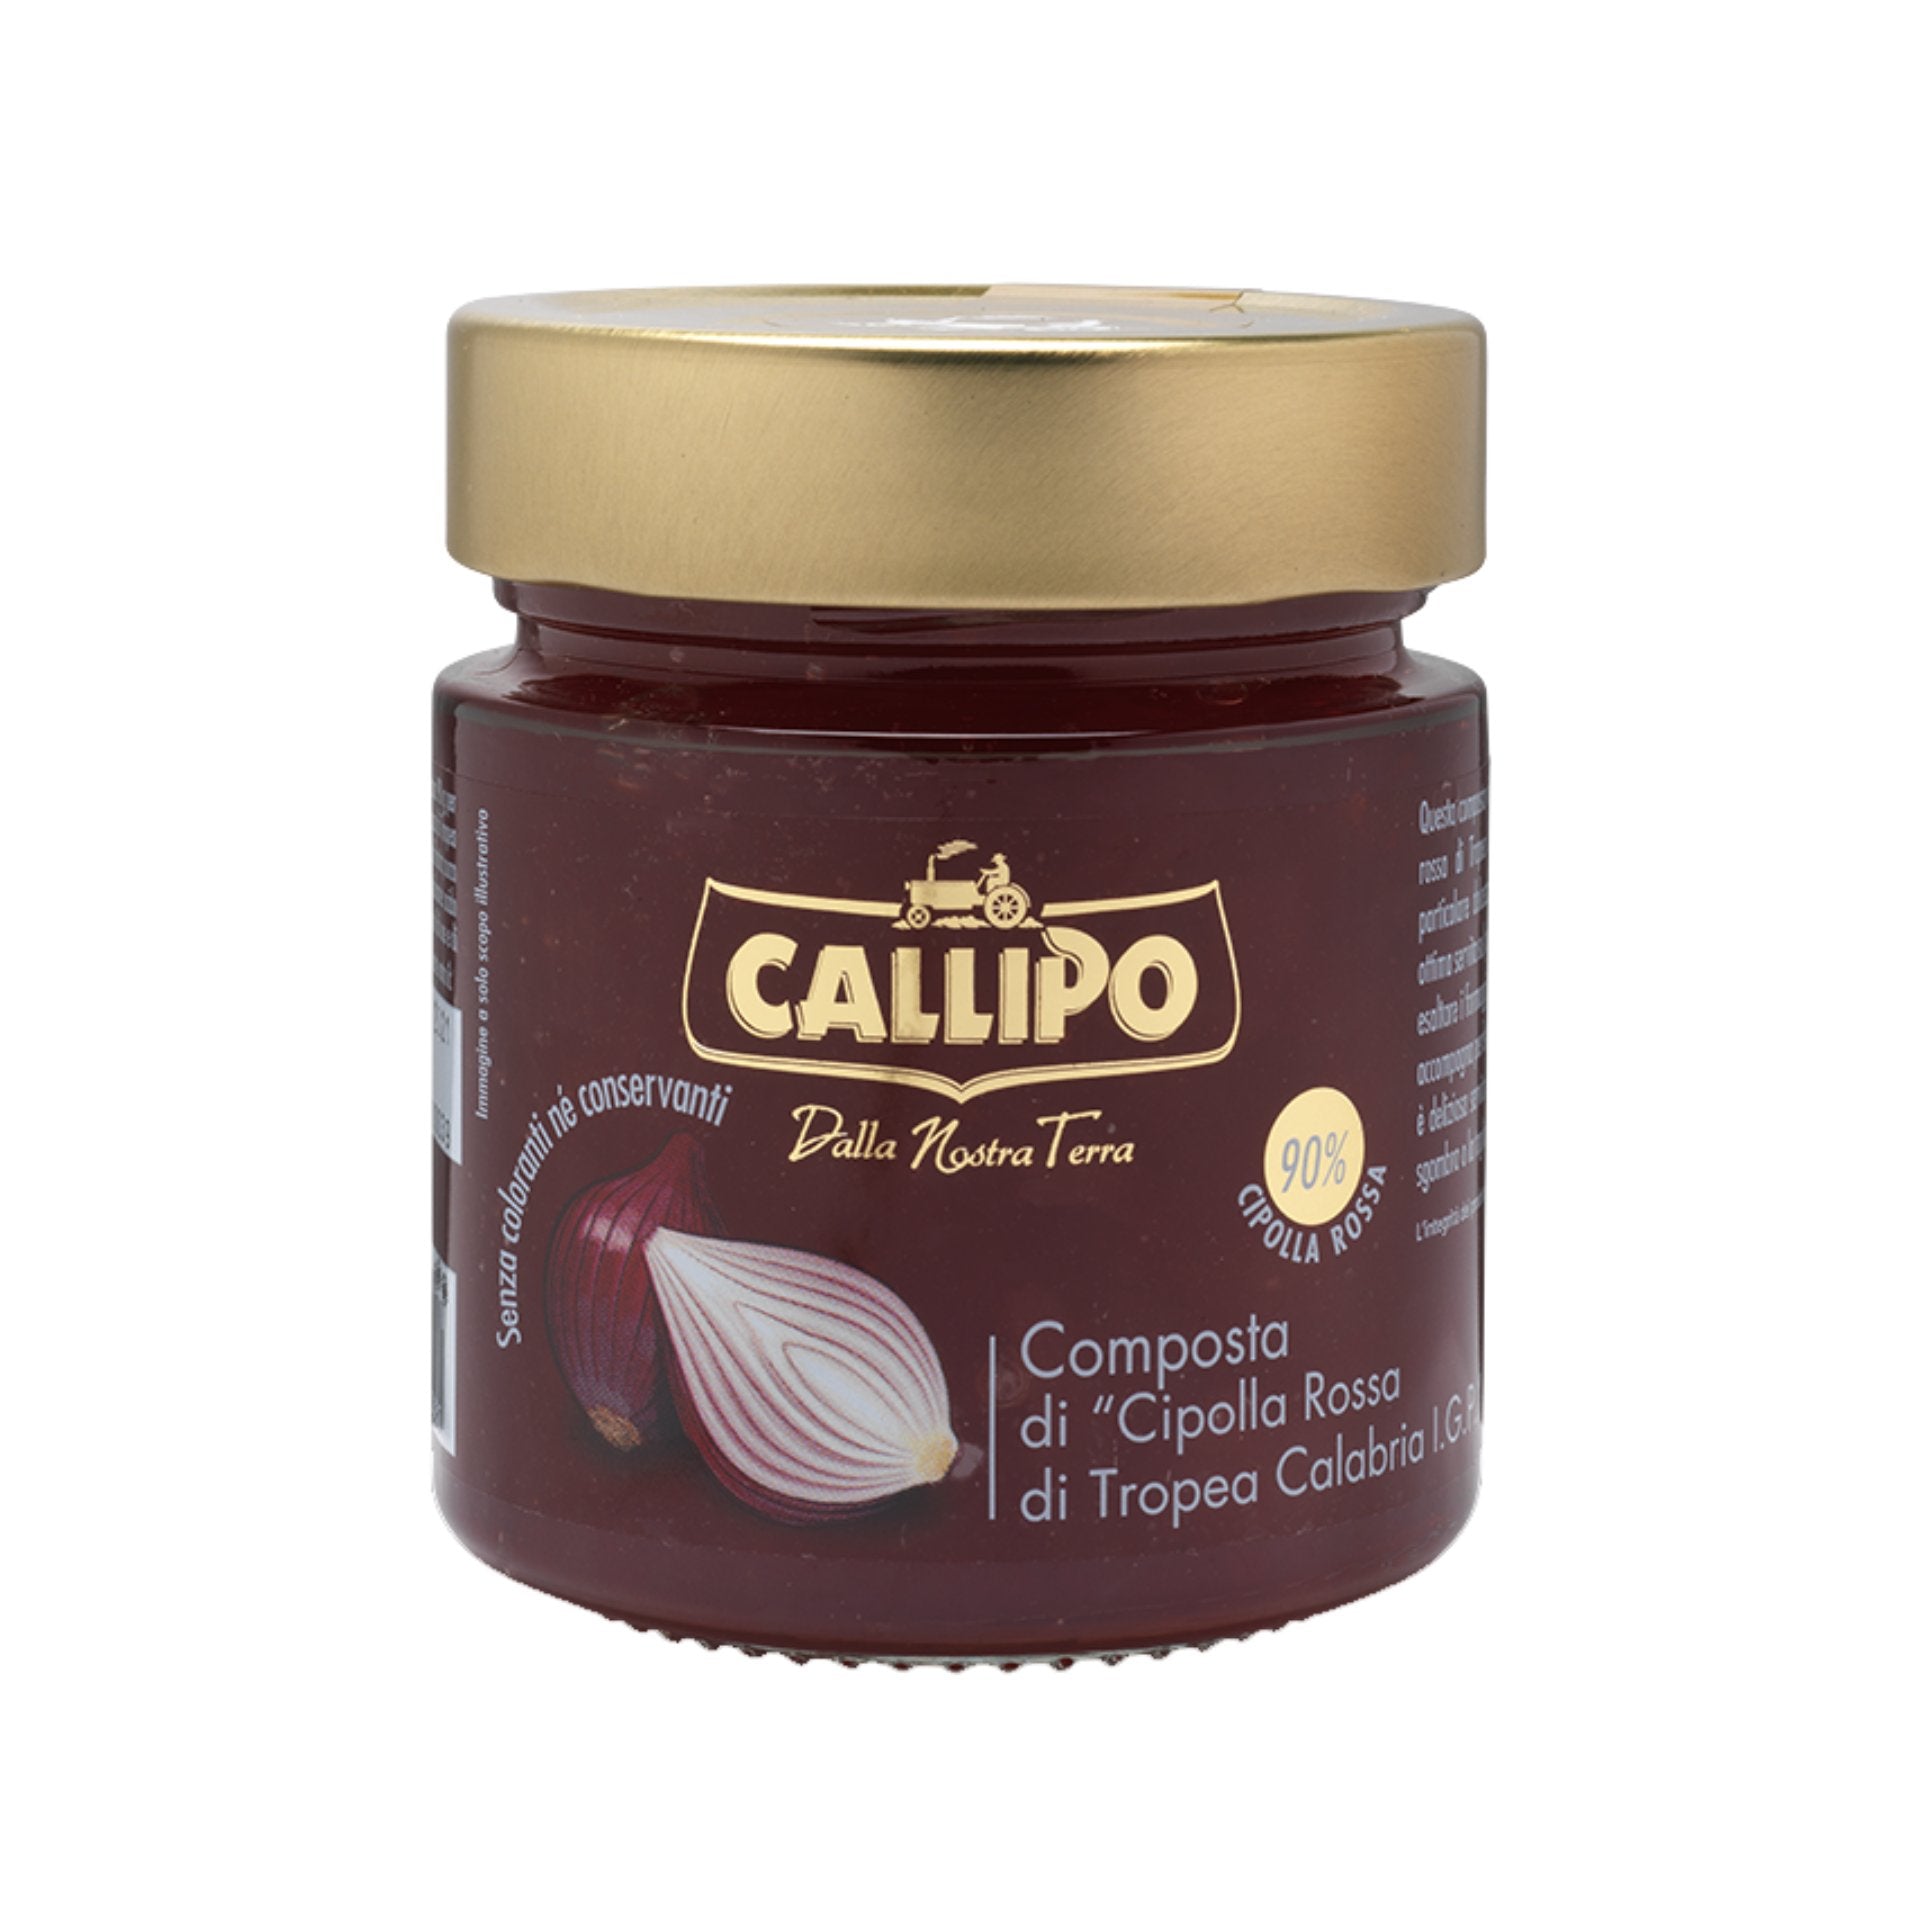 Callipo Tropea IGP Red Onion Spread 300g  | Imported and distributed in the UK by Just Gourmet Foods